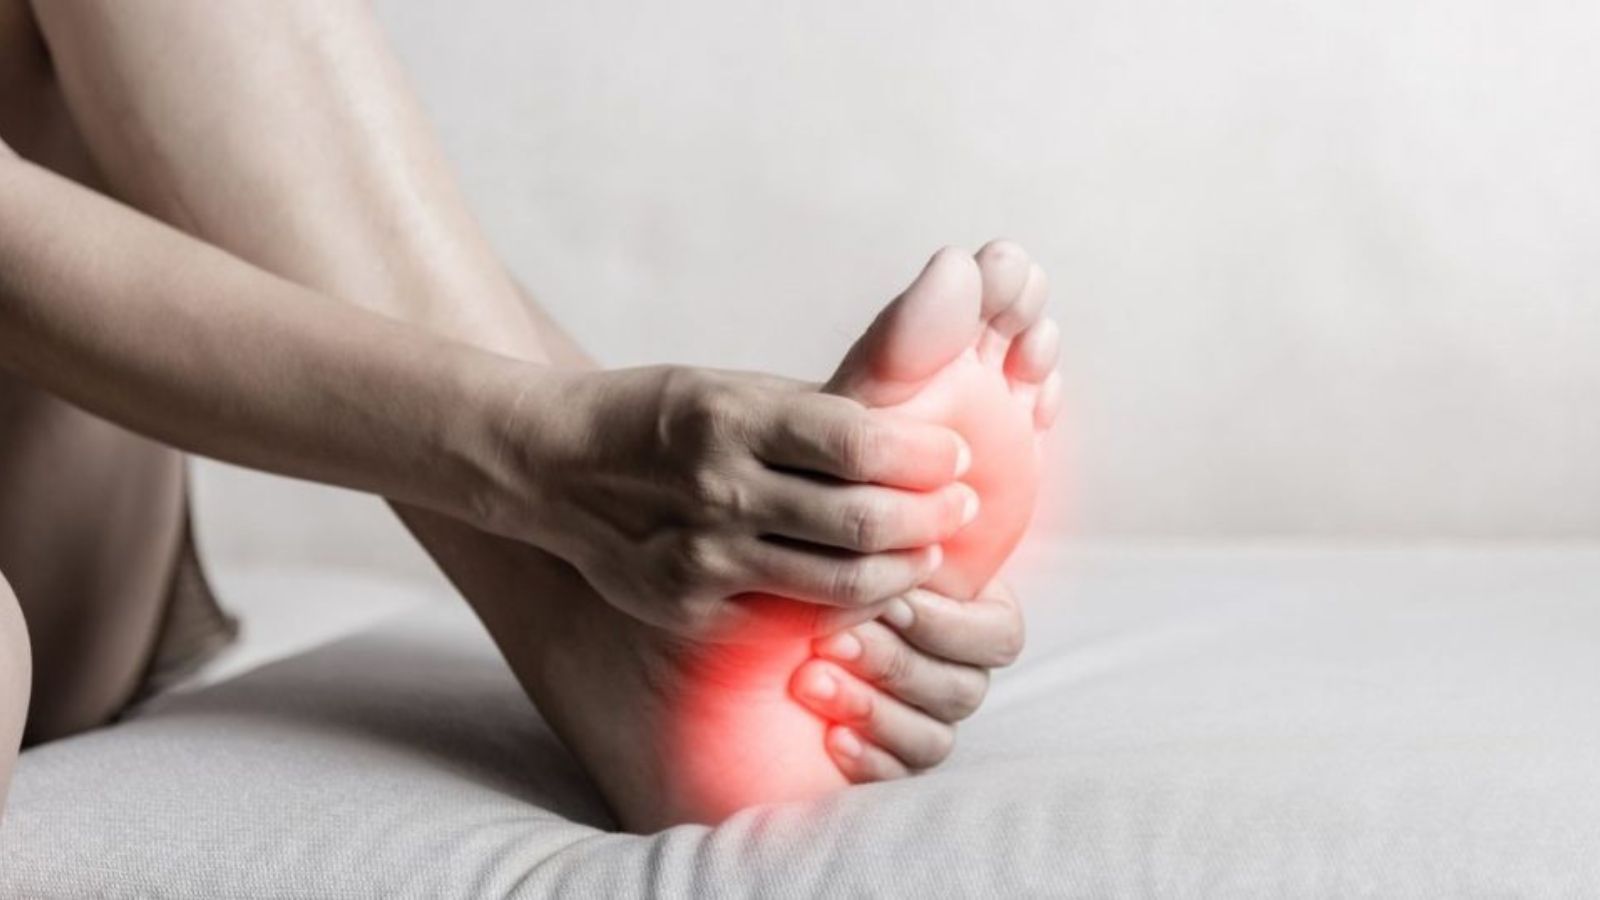 A patient foot with Plantar fasciitis / fasciopathy